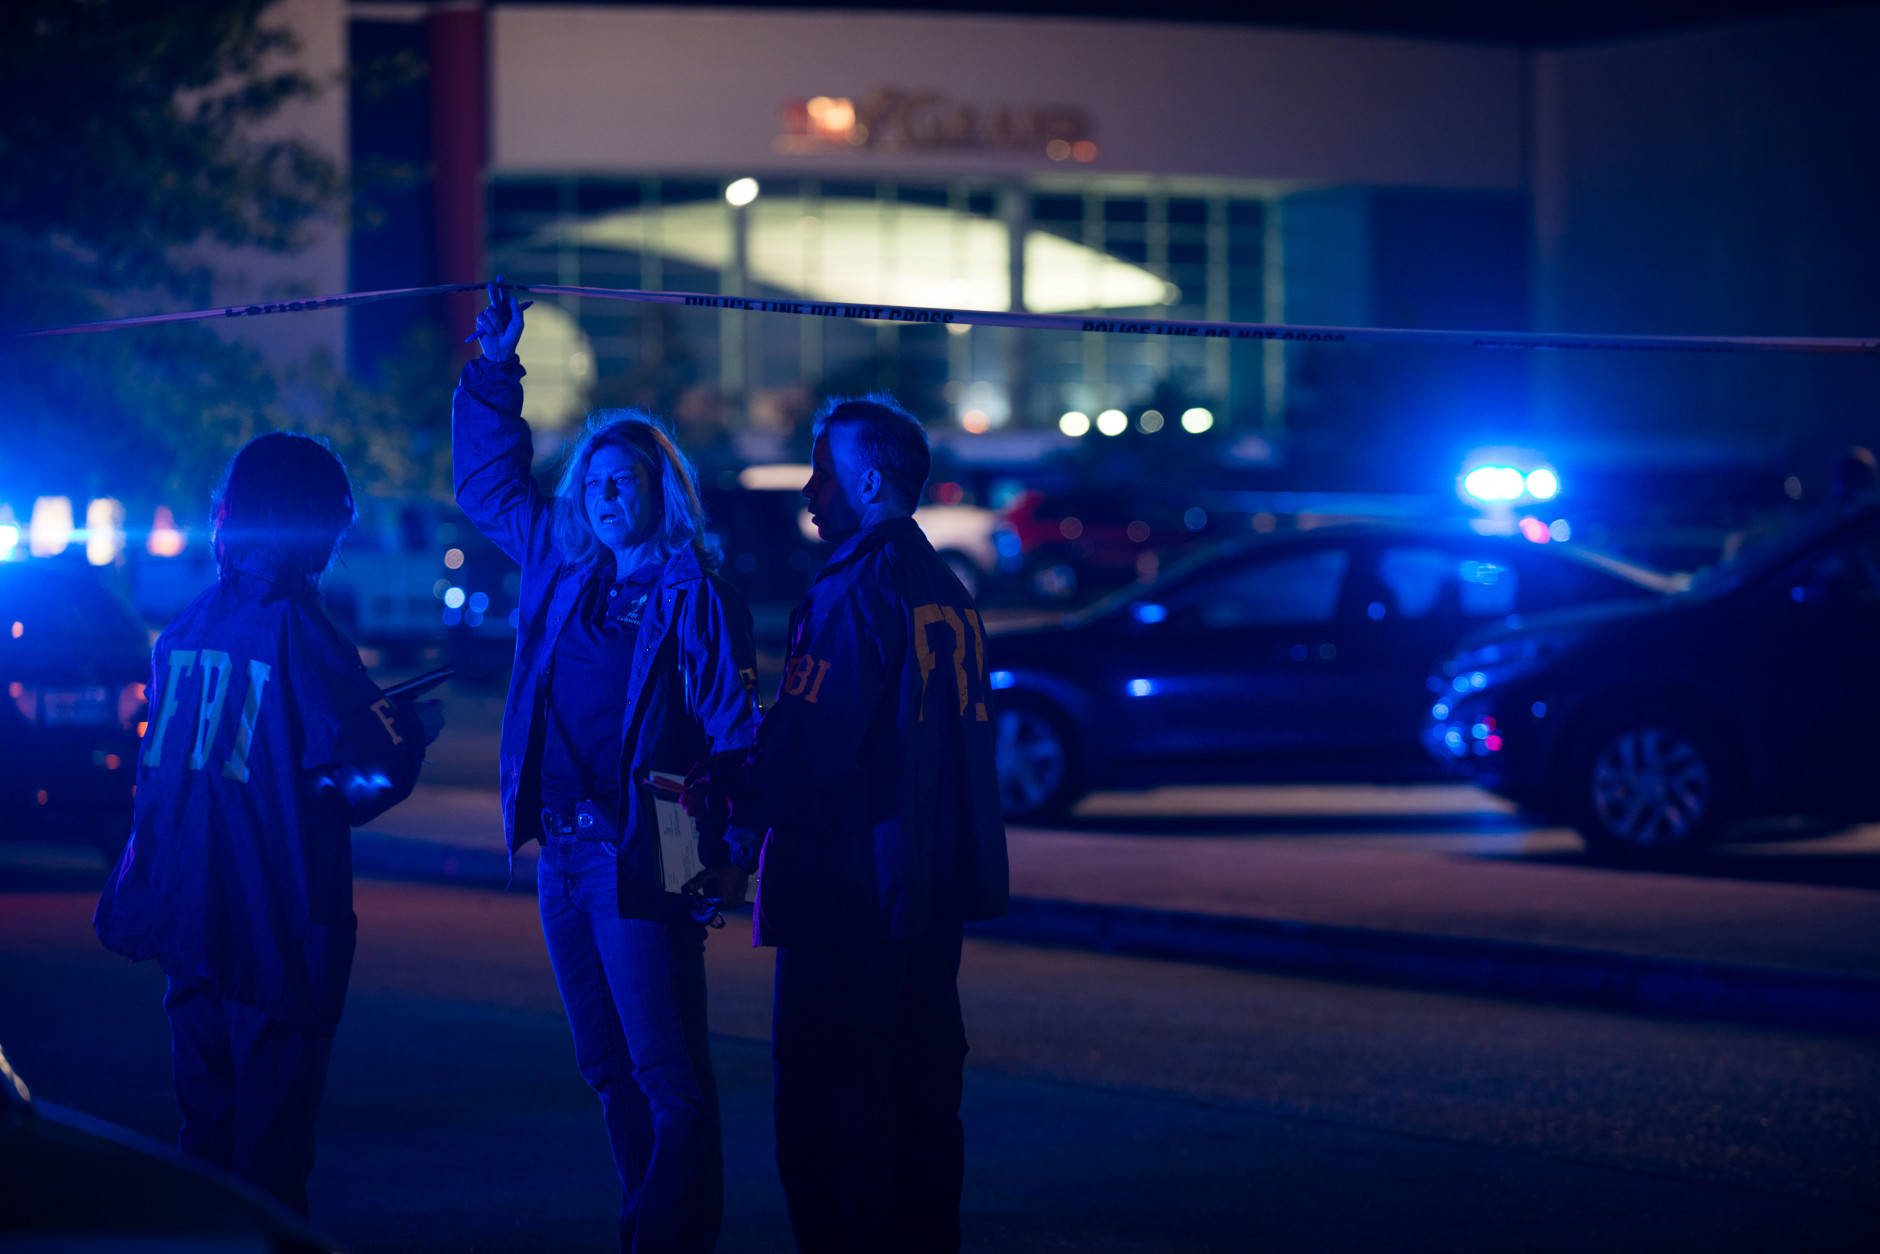 Federal investigators respond to the scene of a shooting at the Grand Theatre on Thursday, July 23, 2015, in Lafayette, La. (AP Photo/Denny Culbert)